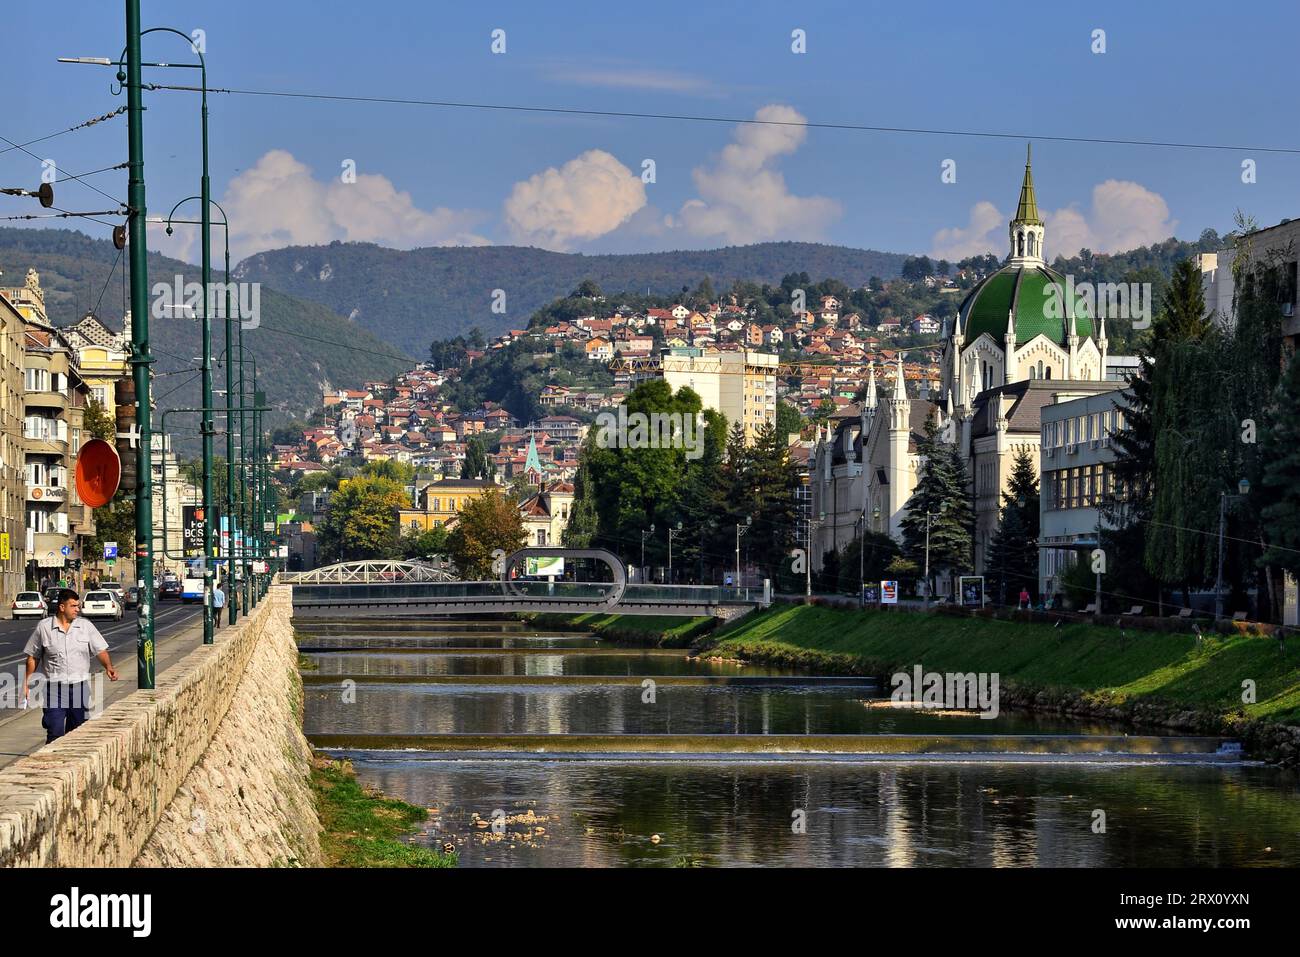 View of Festina Lente Bridge and the Academy of Fine Arts from the banks of Miljacka River that separated the two sides in the Bosnian War Stock Photo